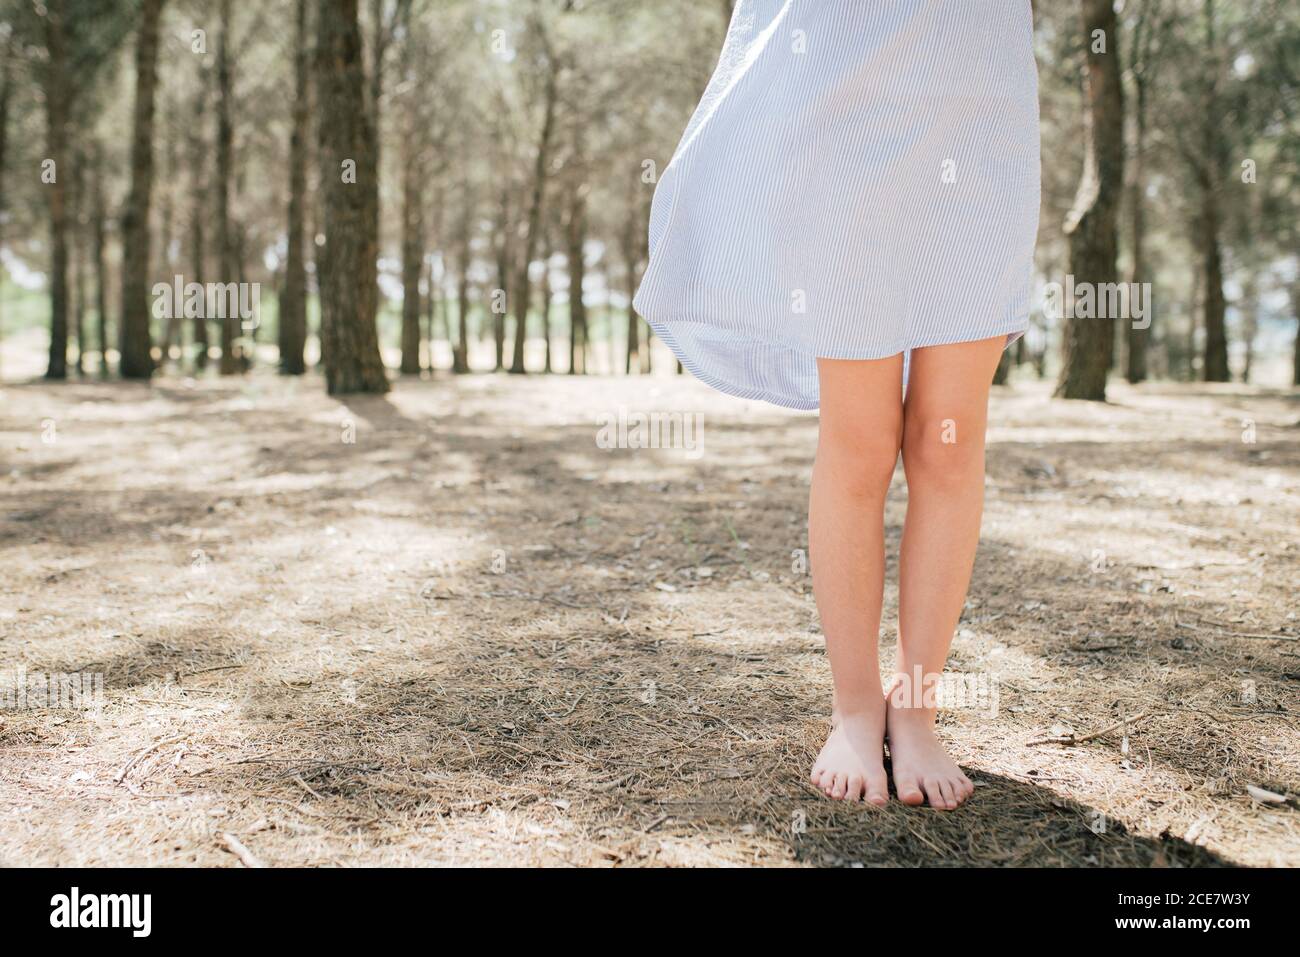 Crop unrecognizable slender barefoot child in pale blue dress standing on dry terrain in alley on sunny day in countryside Stock Photo